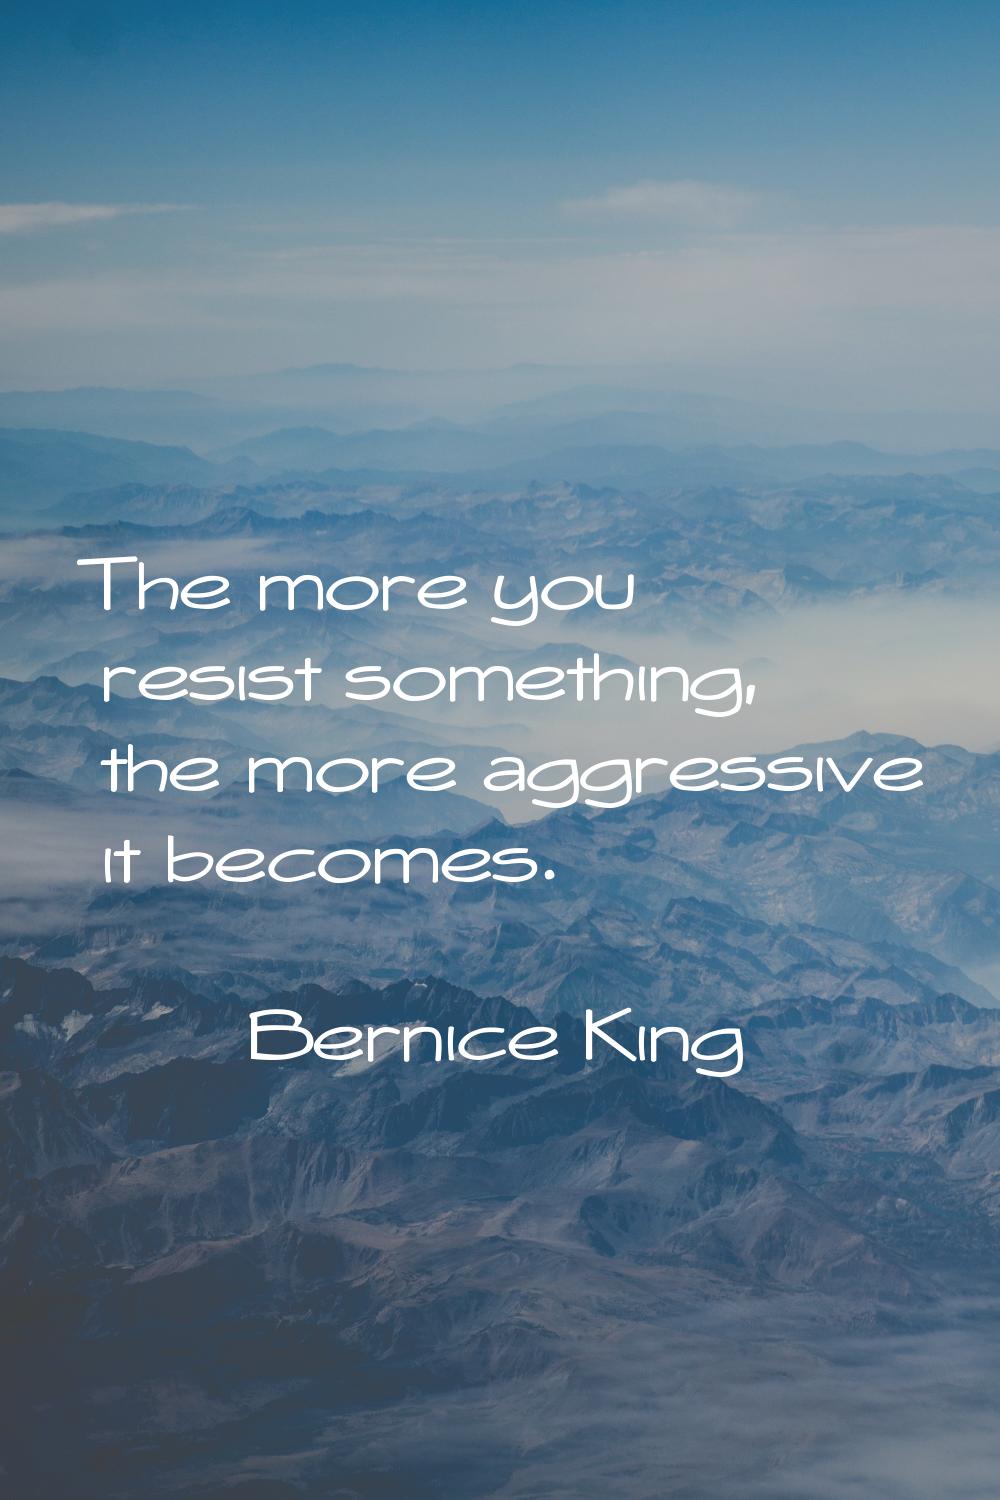 The more you resist something, the more aggressive it becomes.